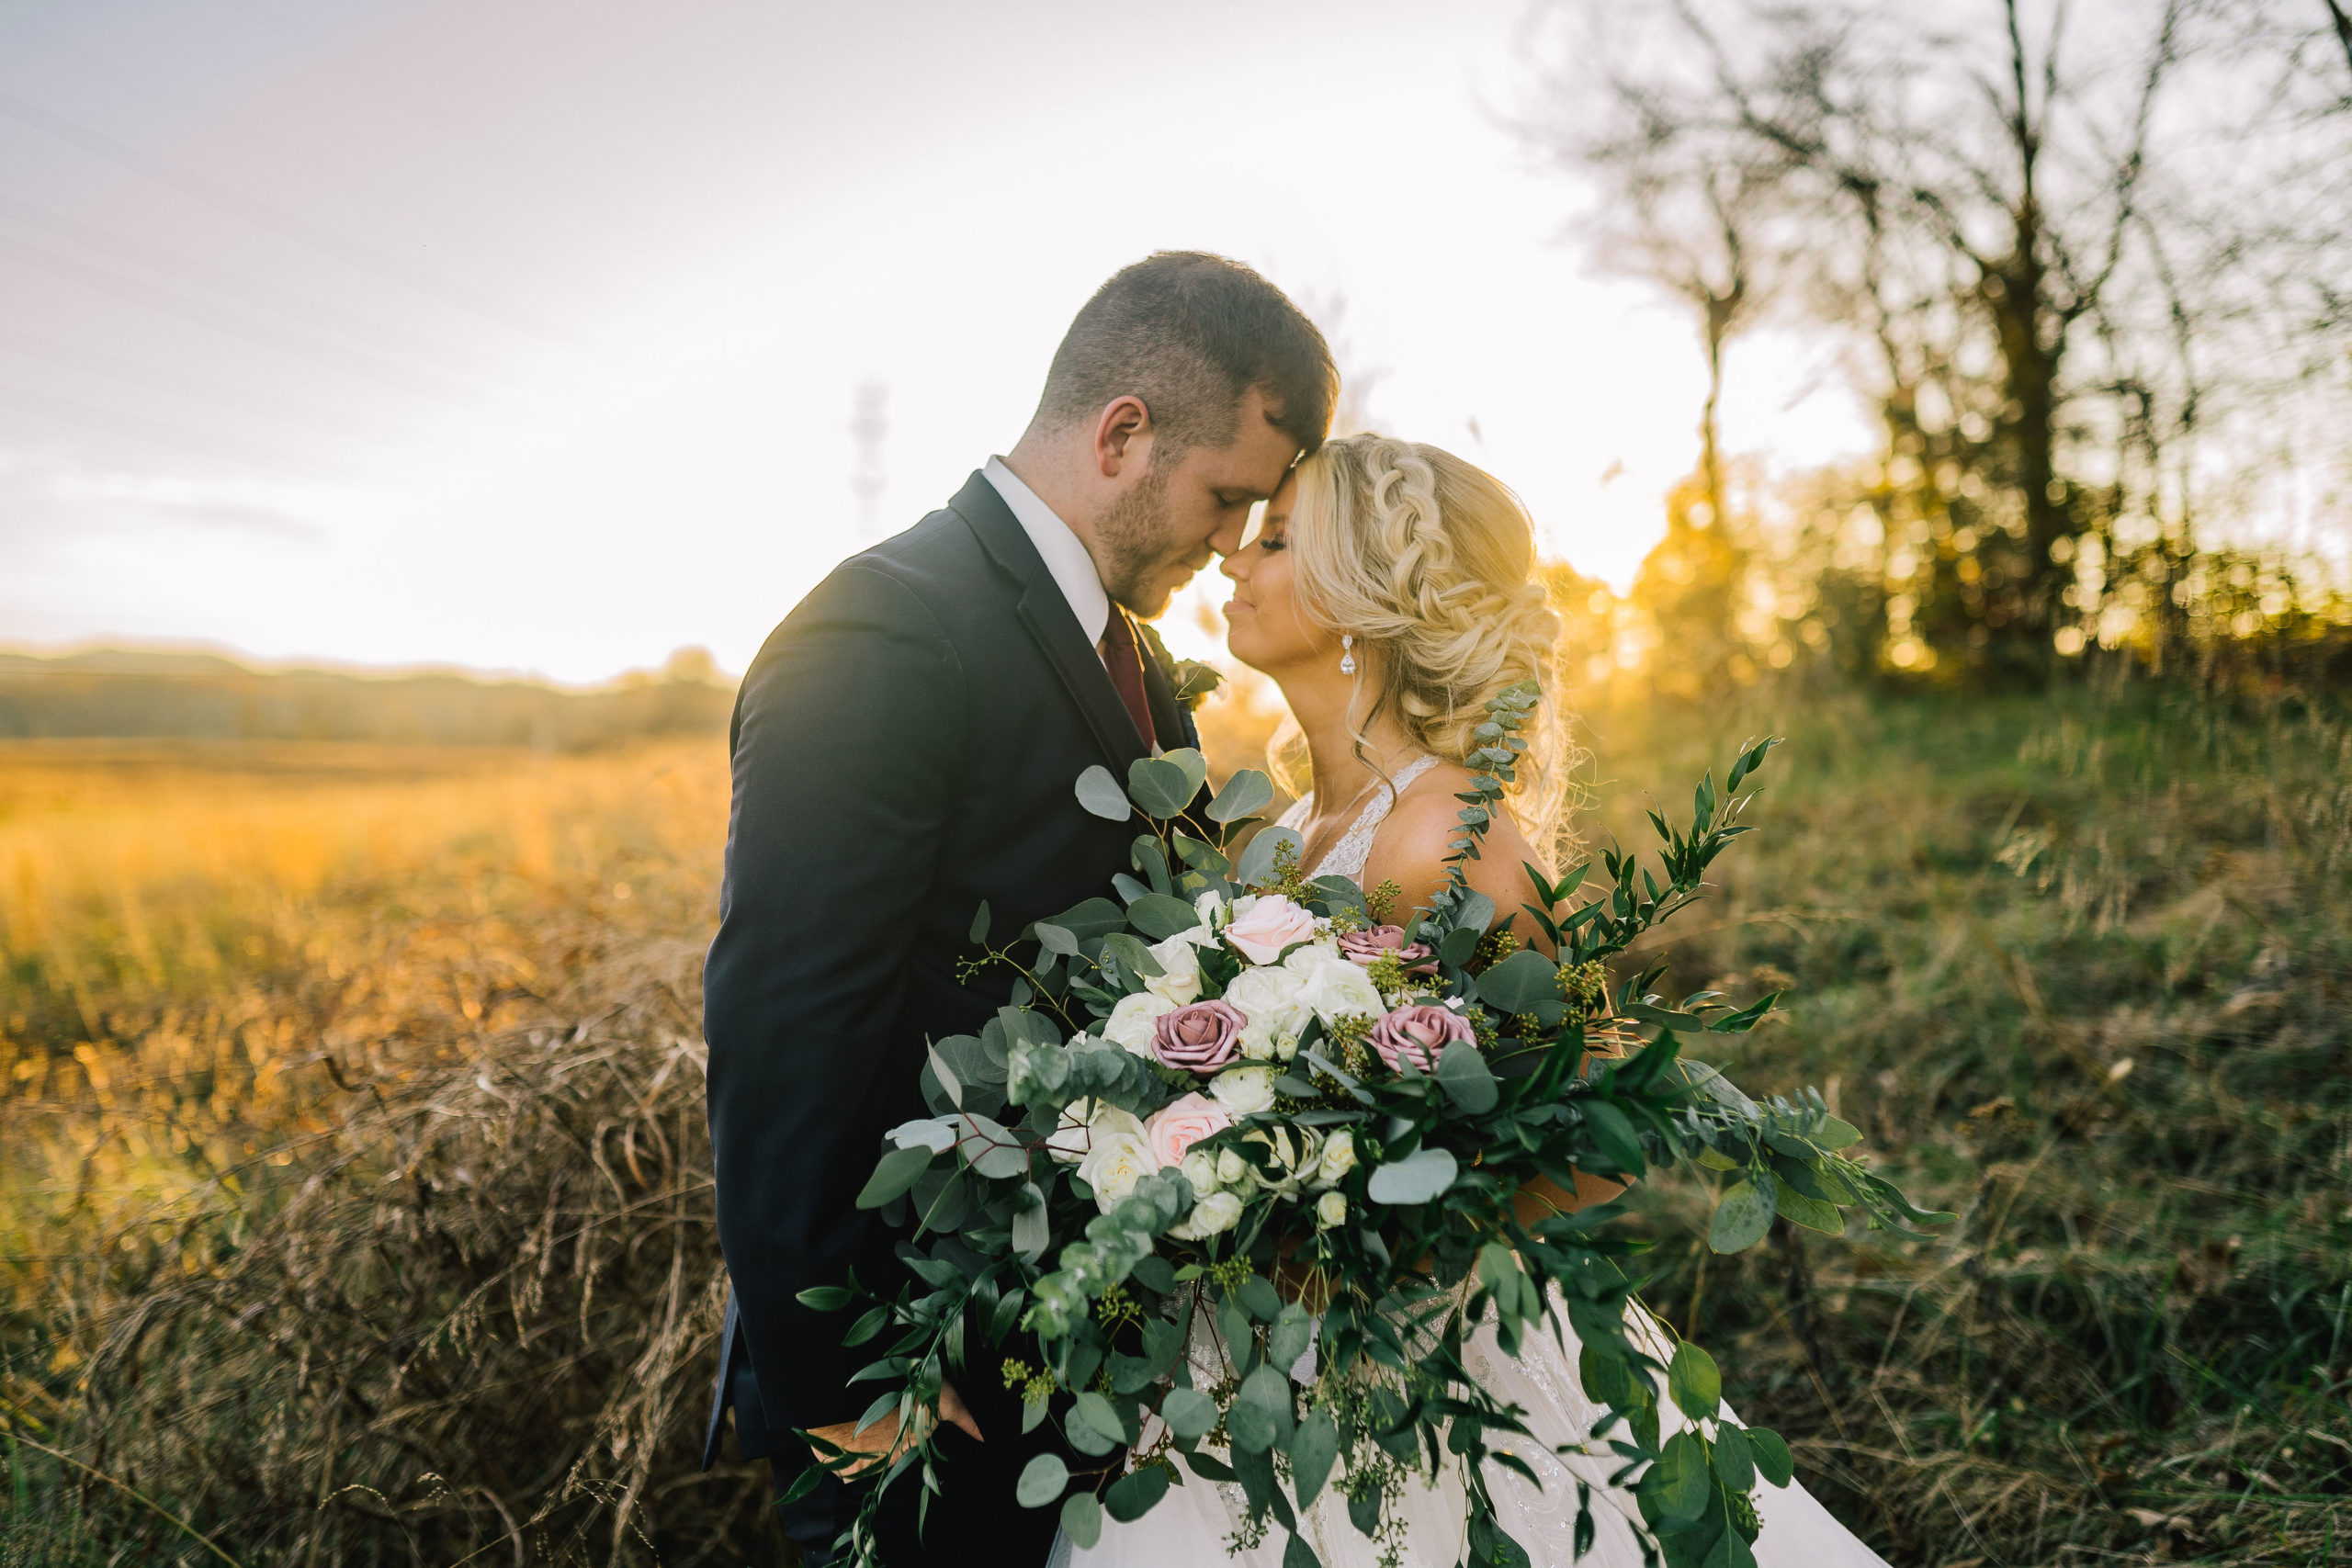 Plan your Knoxville elopement with the bride and groom in the middle of a field at sunset giving all the romantic vibes